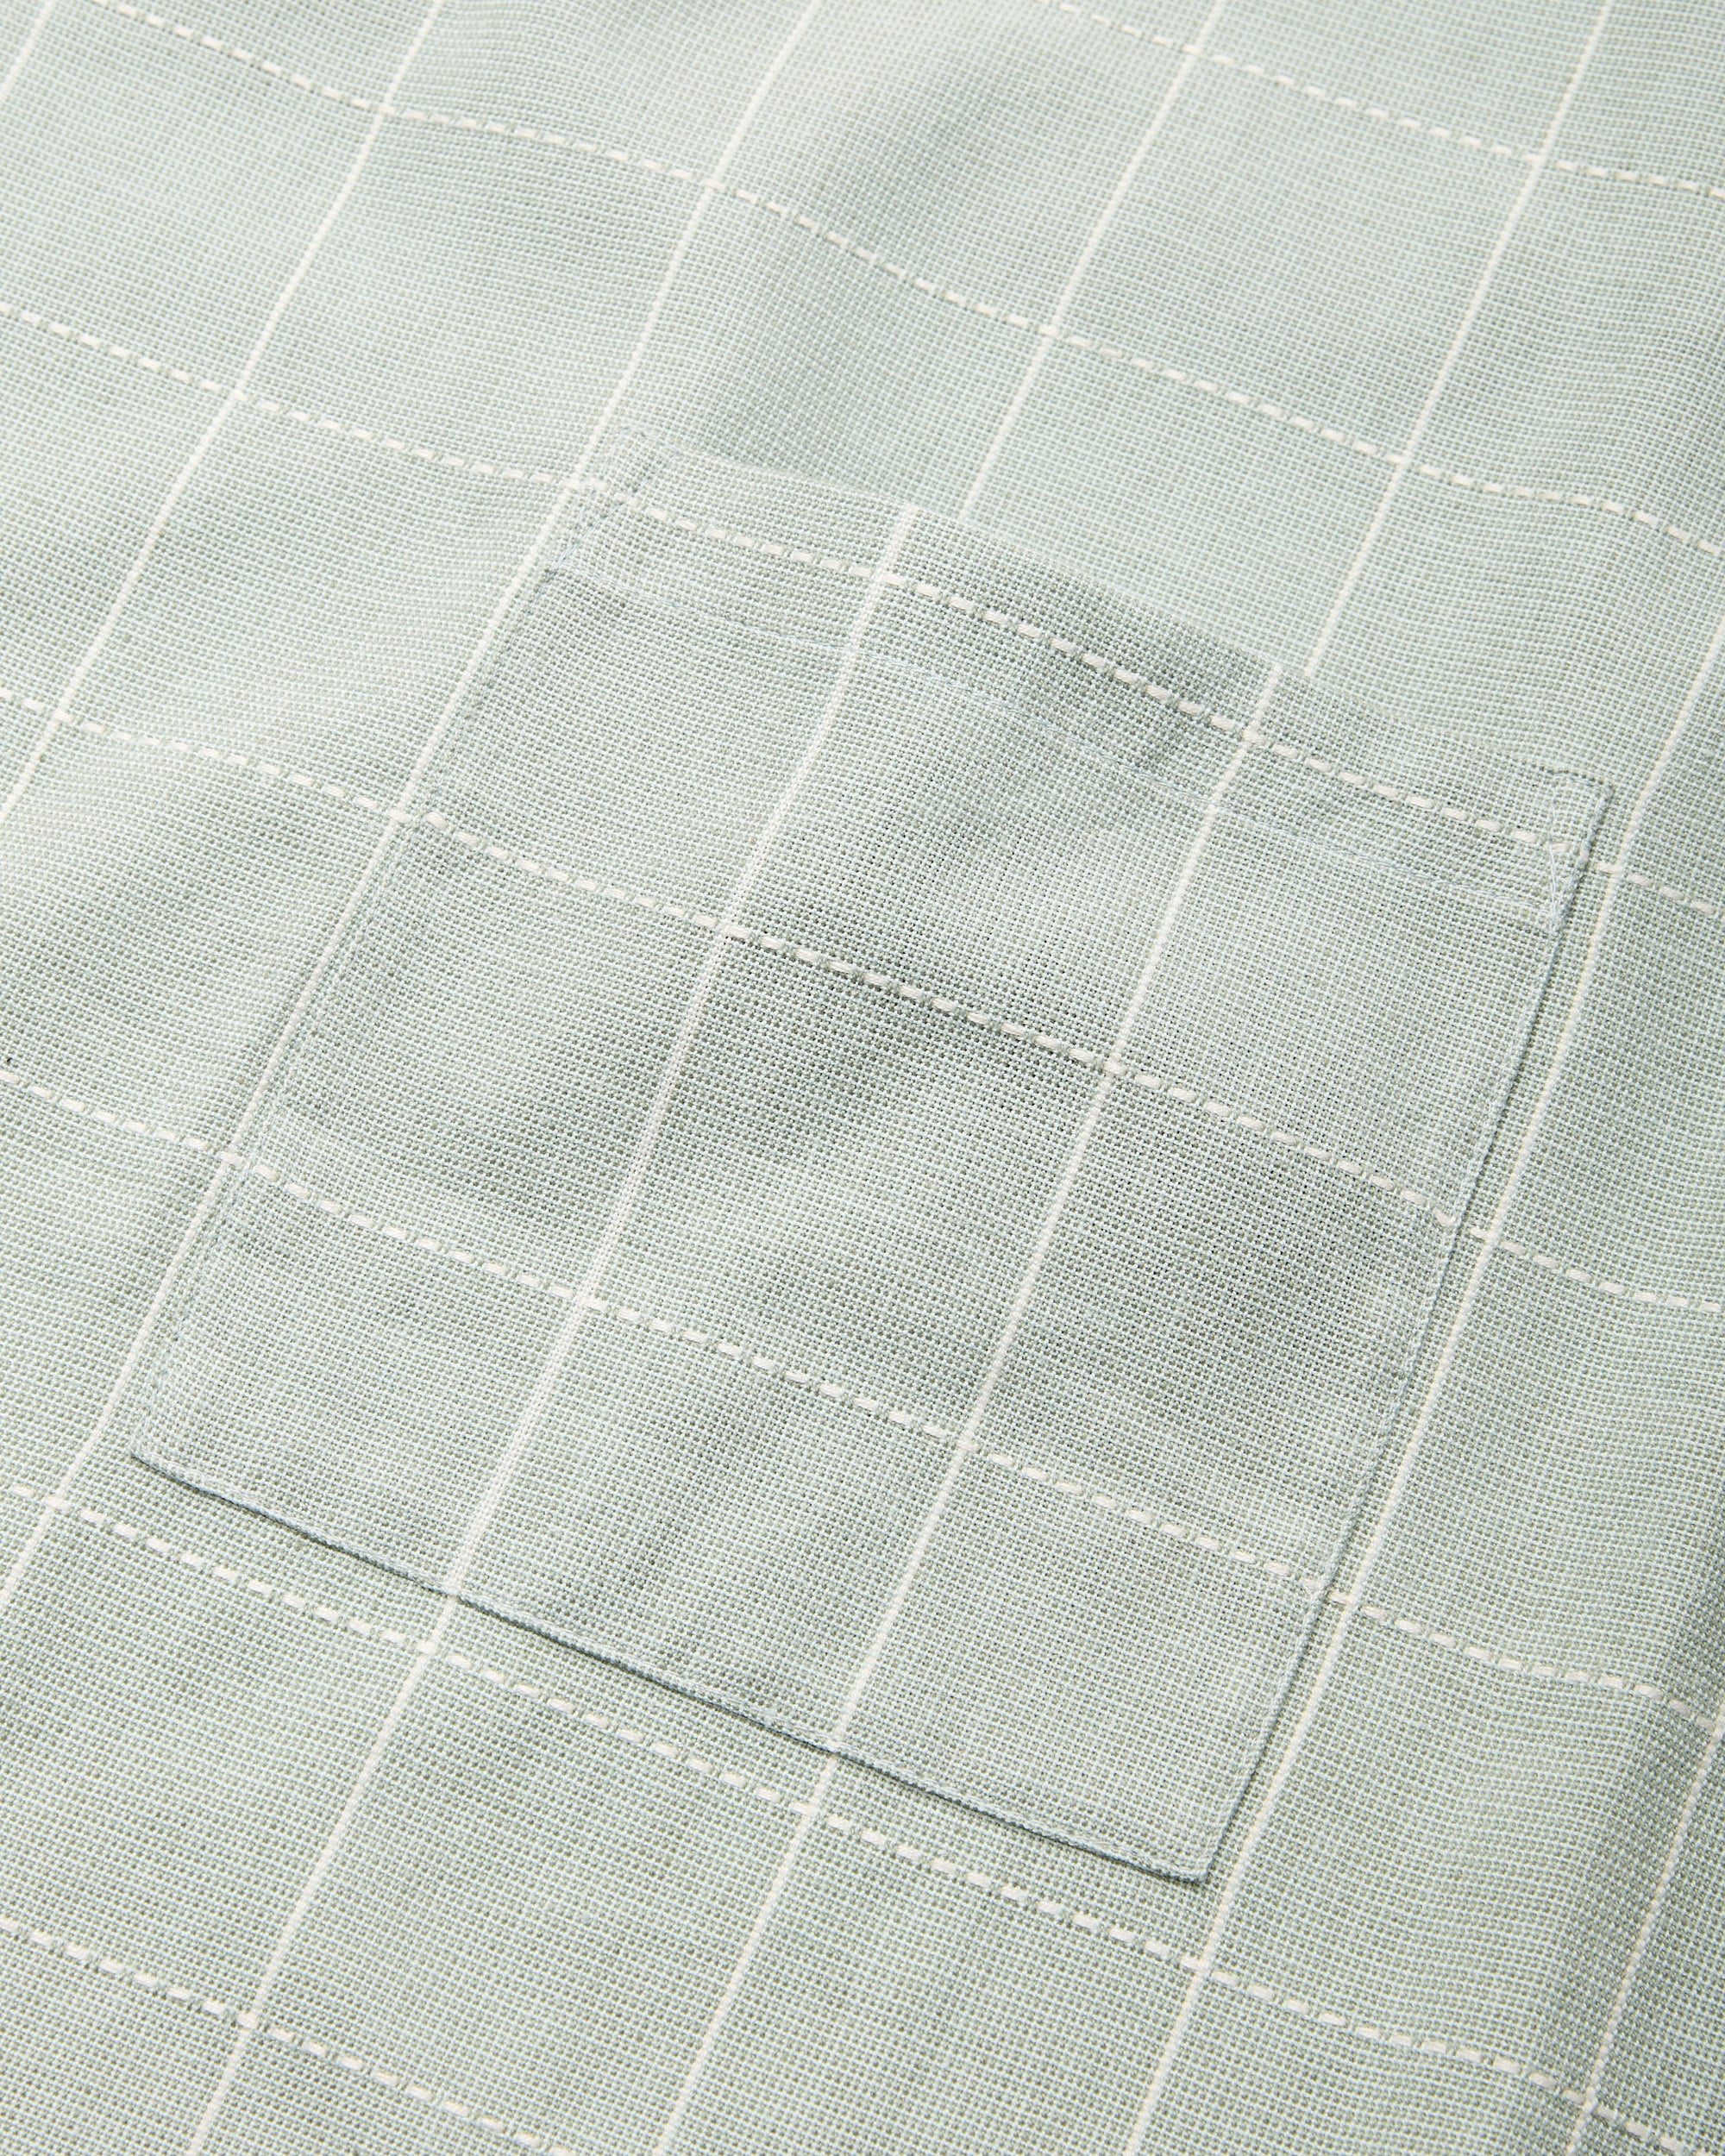 Close-up detail of handwoven ethically made Meridian Kitchen Apron by MINNA in Jay, light blue color.